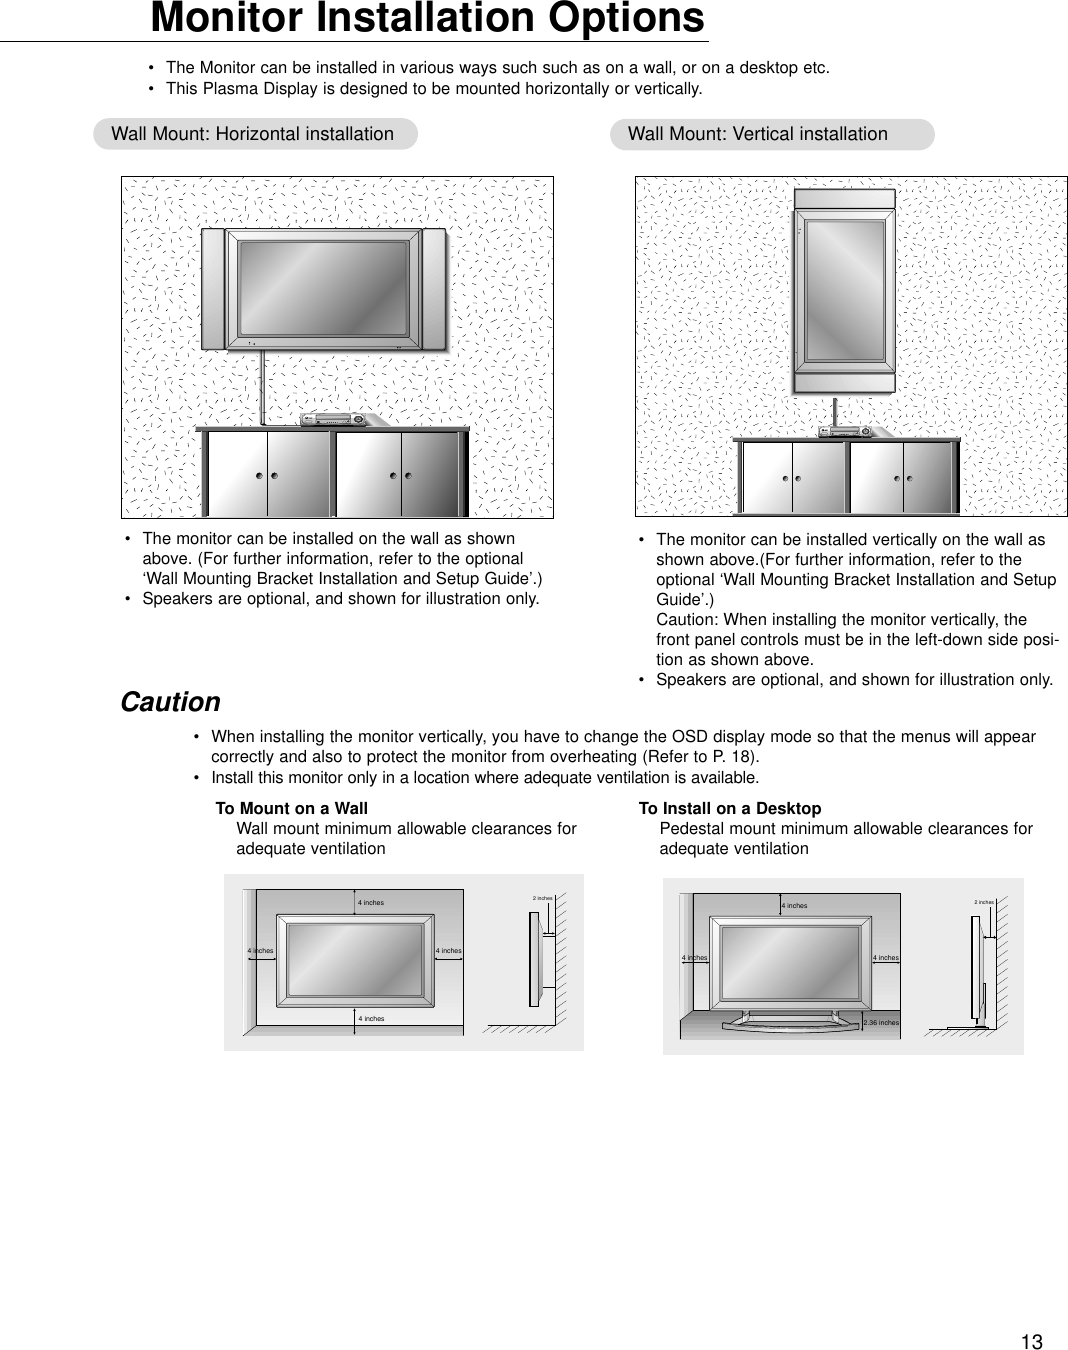 13Monitor Installation Options•The Monitor can be installed in various ways such such as on a wall, or on a desktop etc.•This Plasma Display is designed to be mounted horizontally or vertically.Wall Mount: Horizontal installation Wall Mount: Vertical installation•The monitor can be installed on the wall as shownabove. (For further information, refer to the optional‘Wall Mounting Bracket Installation and Setup Guide’.)•Speakers are optional, and shown for illustration only.•The monitor can be installed vertically on the wall asshown above.(For further information, refer to theoptional ‘Wall Mounting Bracket Installation and SetupGuide’.)Caution: When installing the monitor vertically, thefront panel controls must be in the left-down side posi-tion as shown above.•Speakers are optional, and shown for illustration only.•When installing the monitor vertically, you have to change the OSD display mode so that the menus will appearcorrectly and also to protect the monitor from overheating (Refer to P. 18).•Install this monitor only in a location where adequate ventilation is available.Caution2 inches4 inches2.36 inches4 inches4 inches4 inches4 inches4 inches4 inches2 inchesTo Mount on a WallWall mount minimum allowable clearances foradequate ventilationTo Install on a DesktopPedestal mount minimum allowable clearances foradequate ventilation